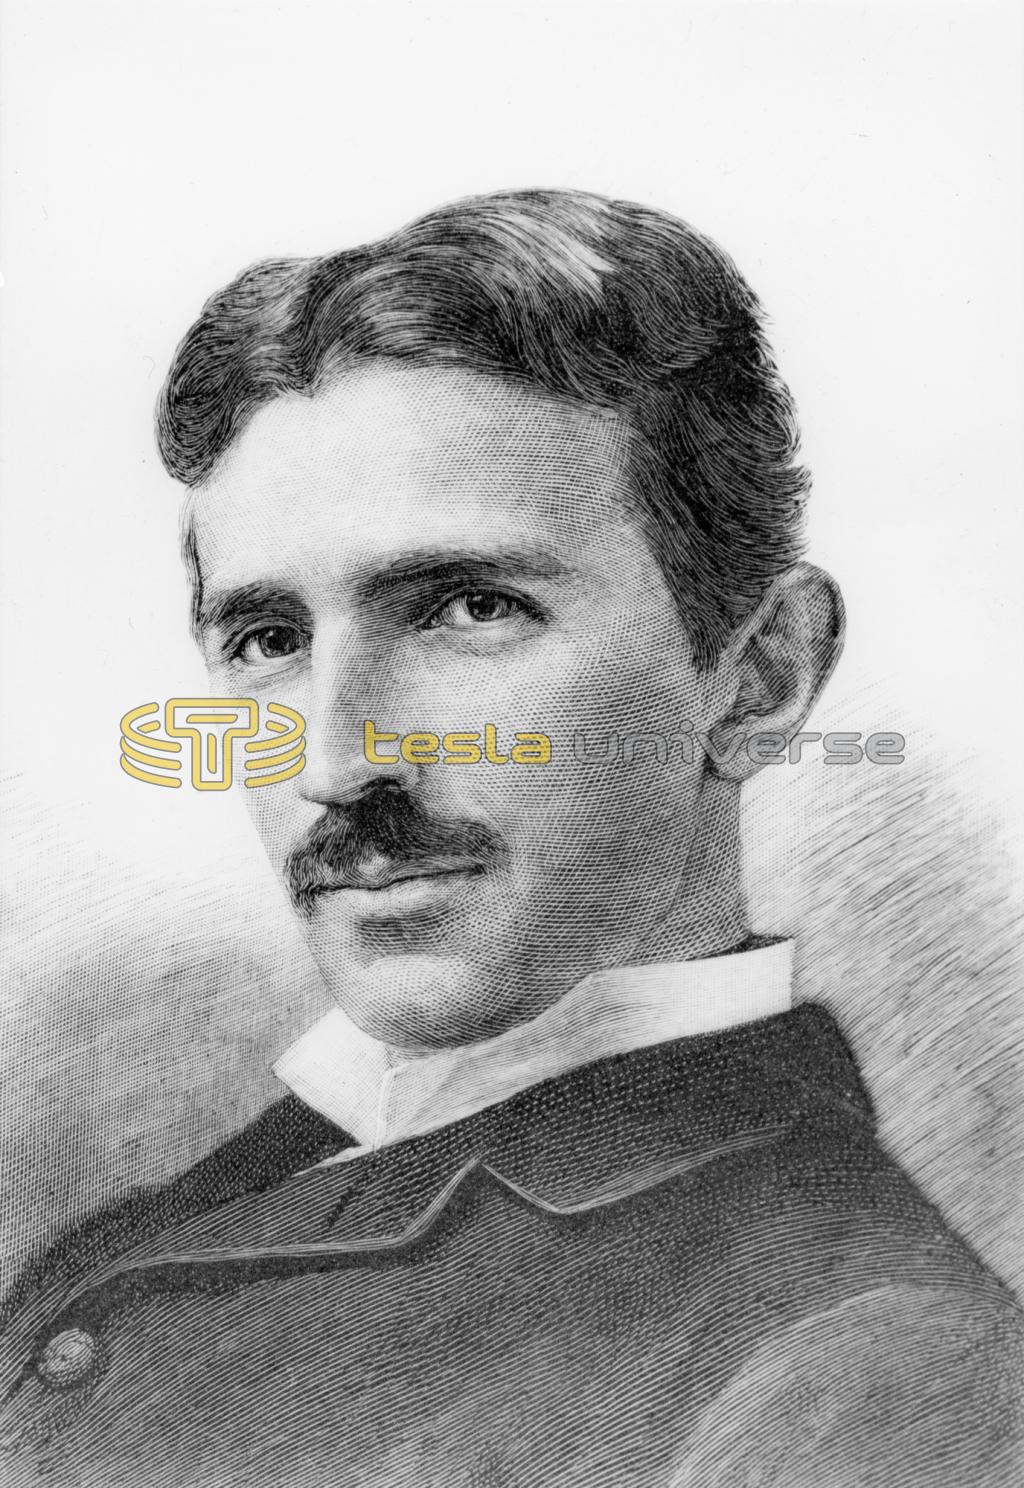 Nikola Tesla, the inventor whose discoveries completely changed the cadence of human progress